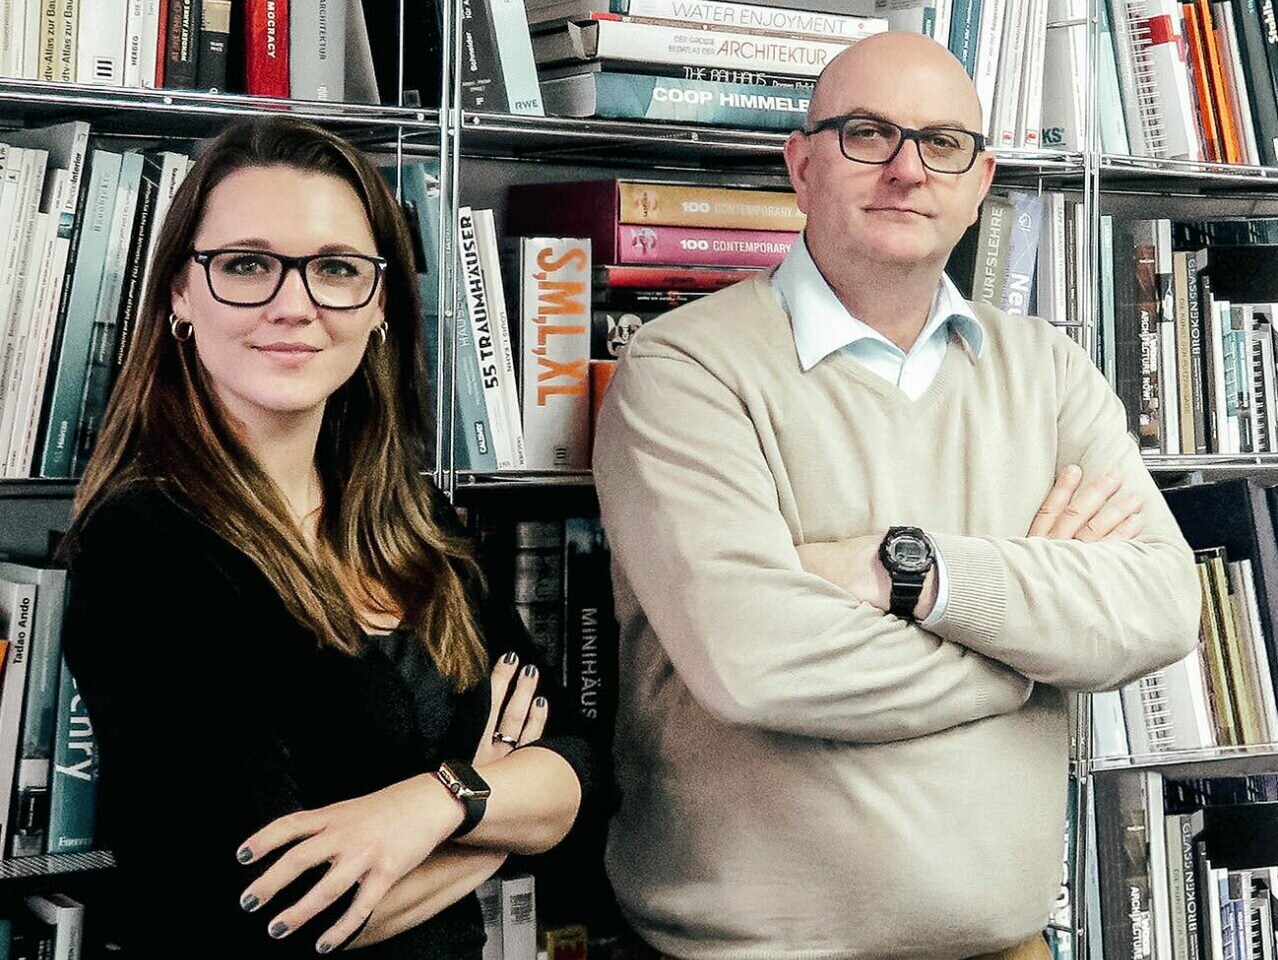 A portrait of architect Jens-Uwe Lau and project manager Kristin Prelec, standing in front of a bookcase